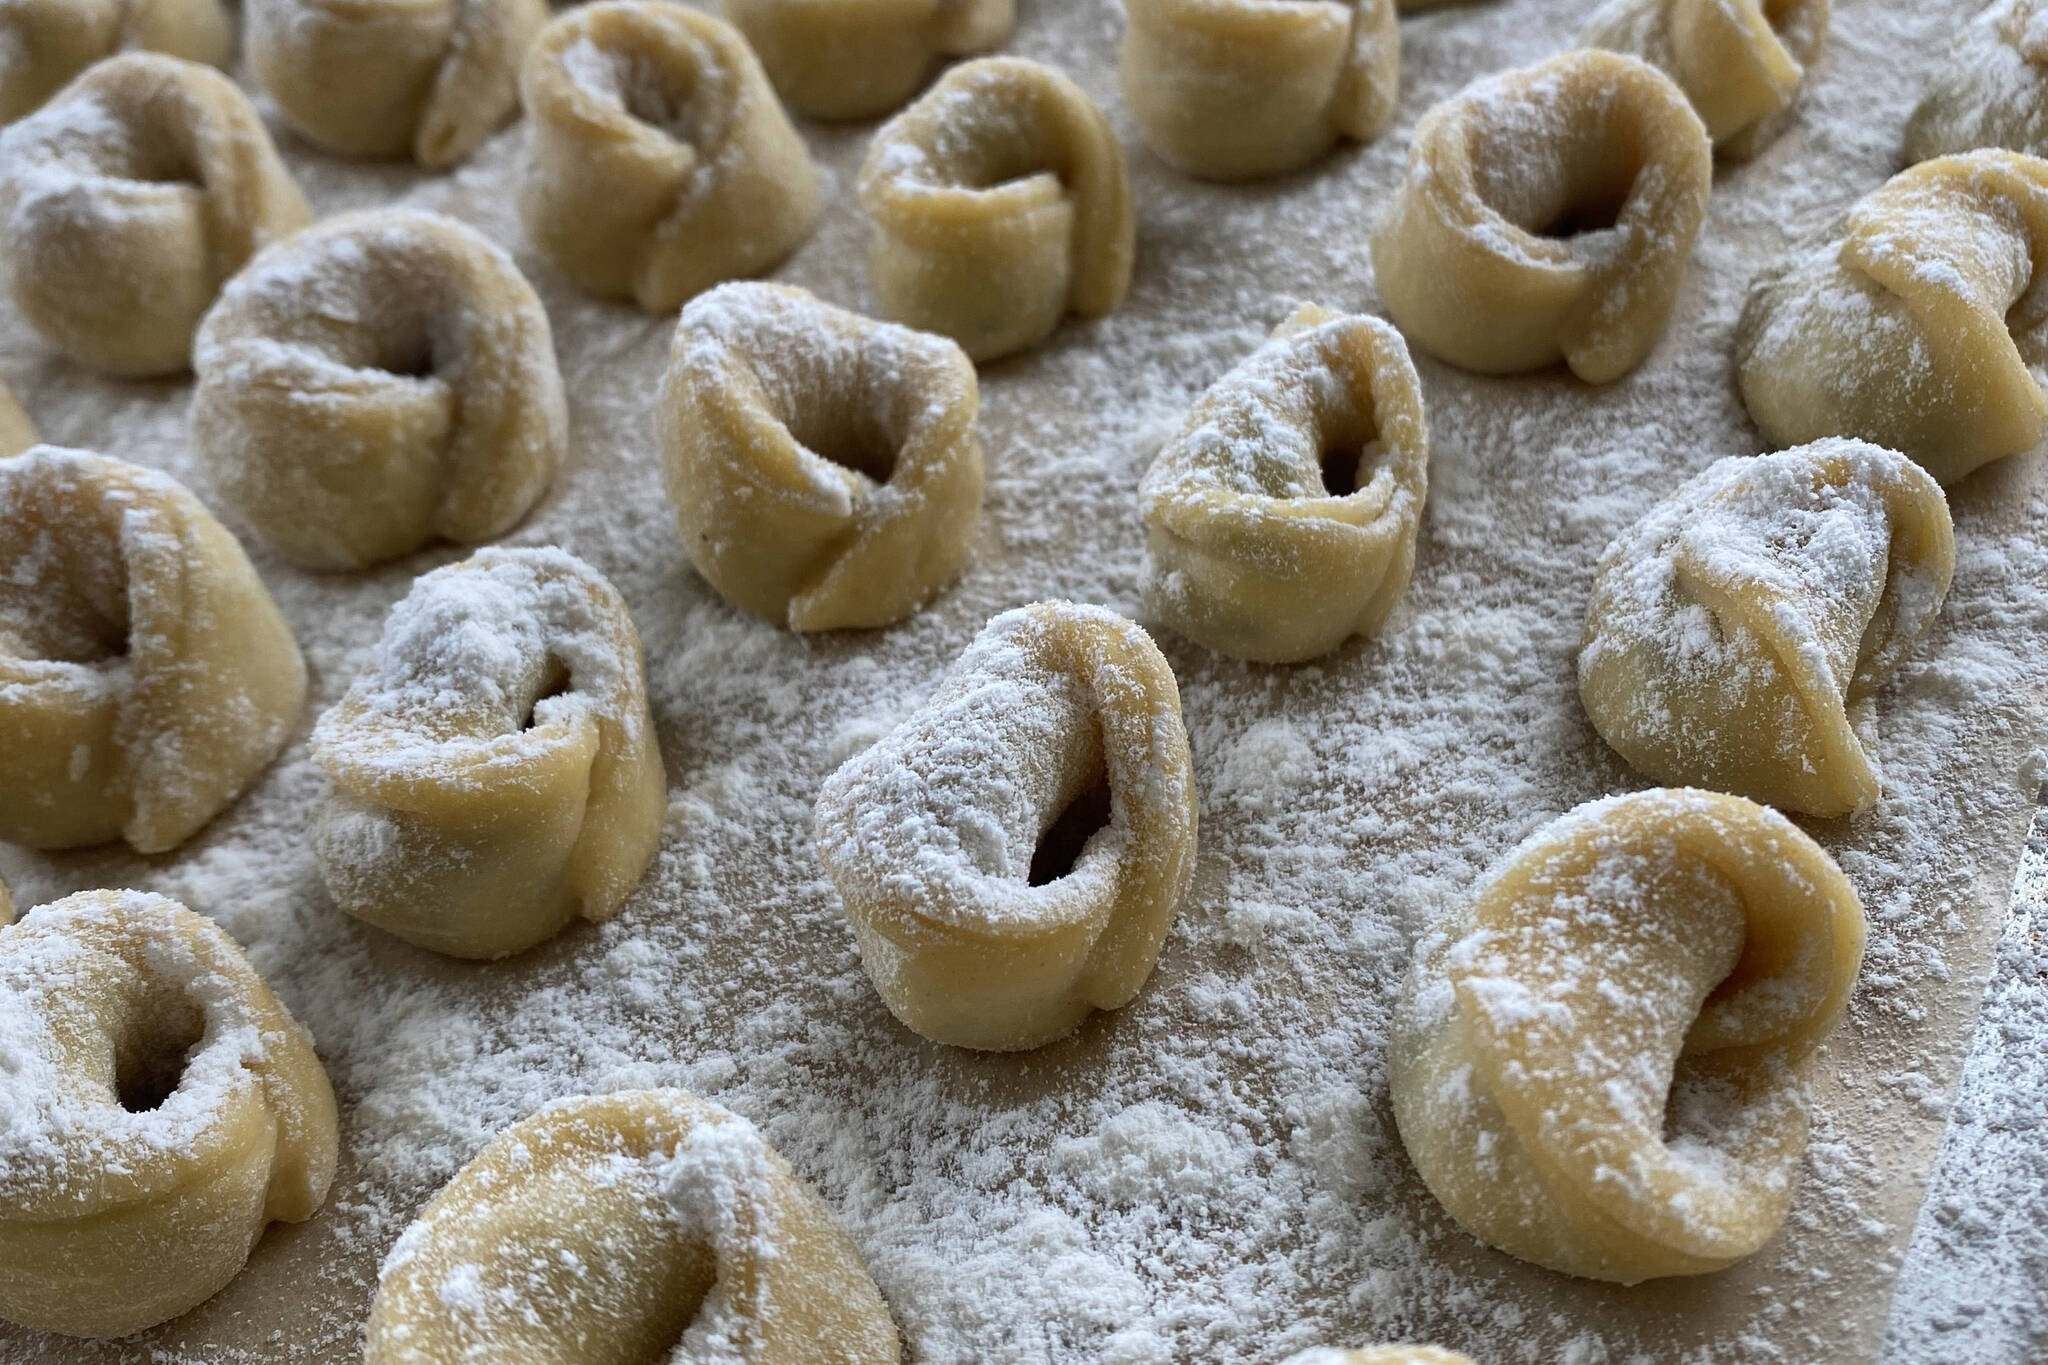 Mushroom and prosciutto tortellini are ready for freezing or boiling. (Photo by Tressa Dale/Peninsula Clarion)